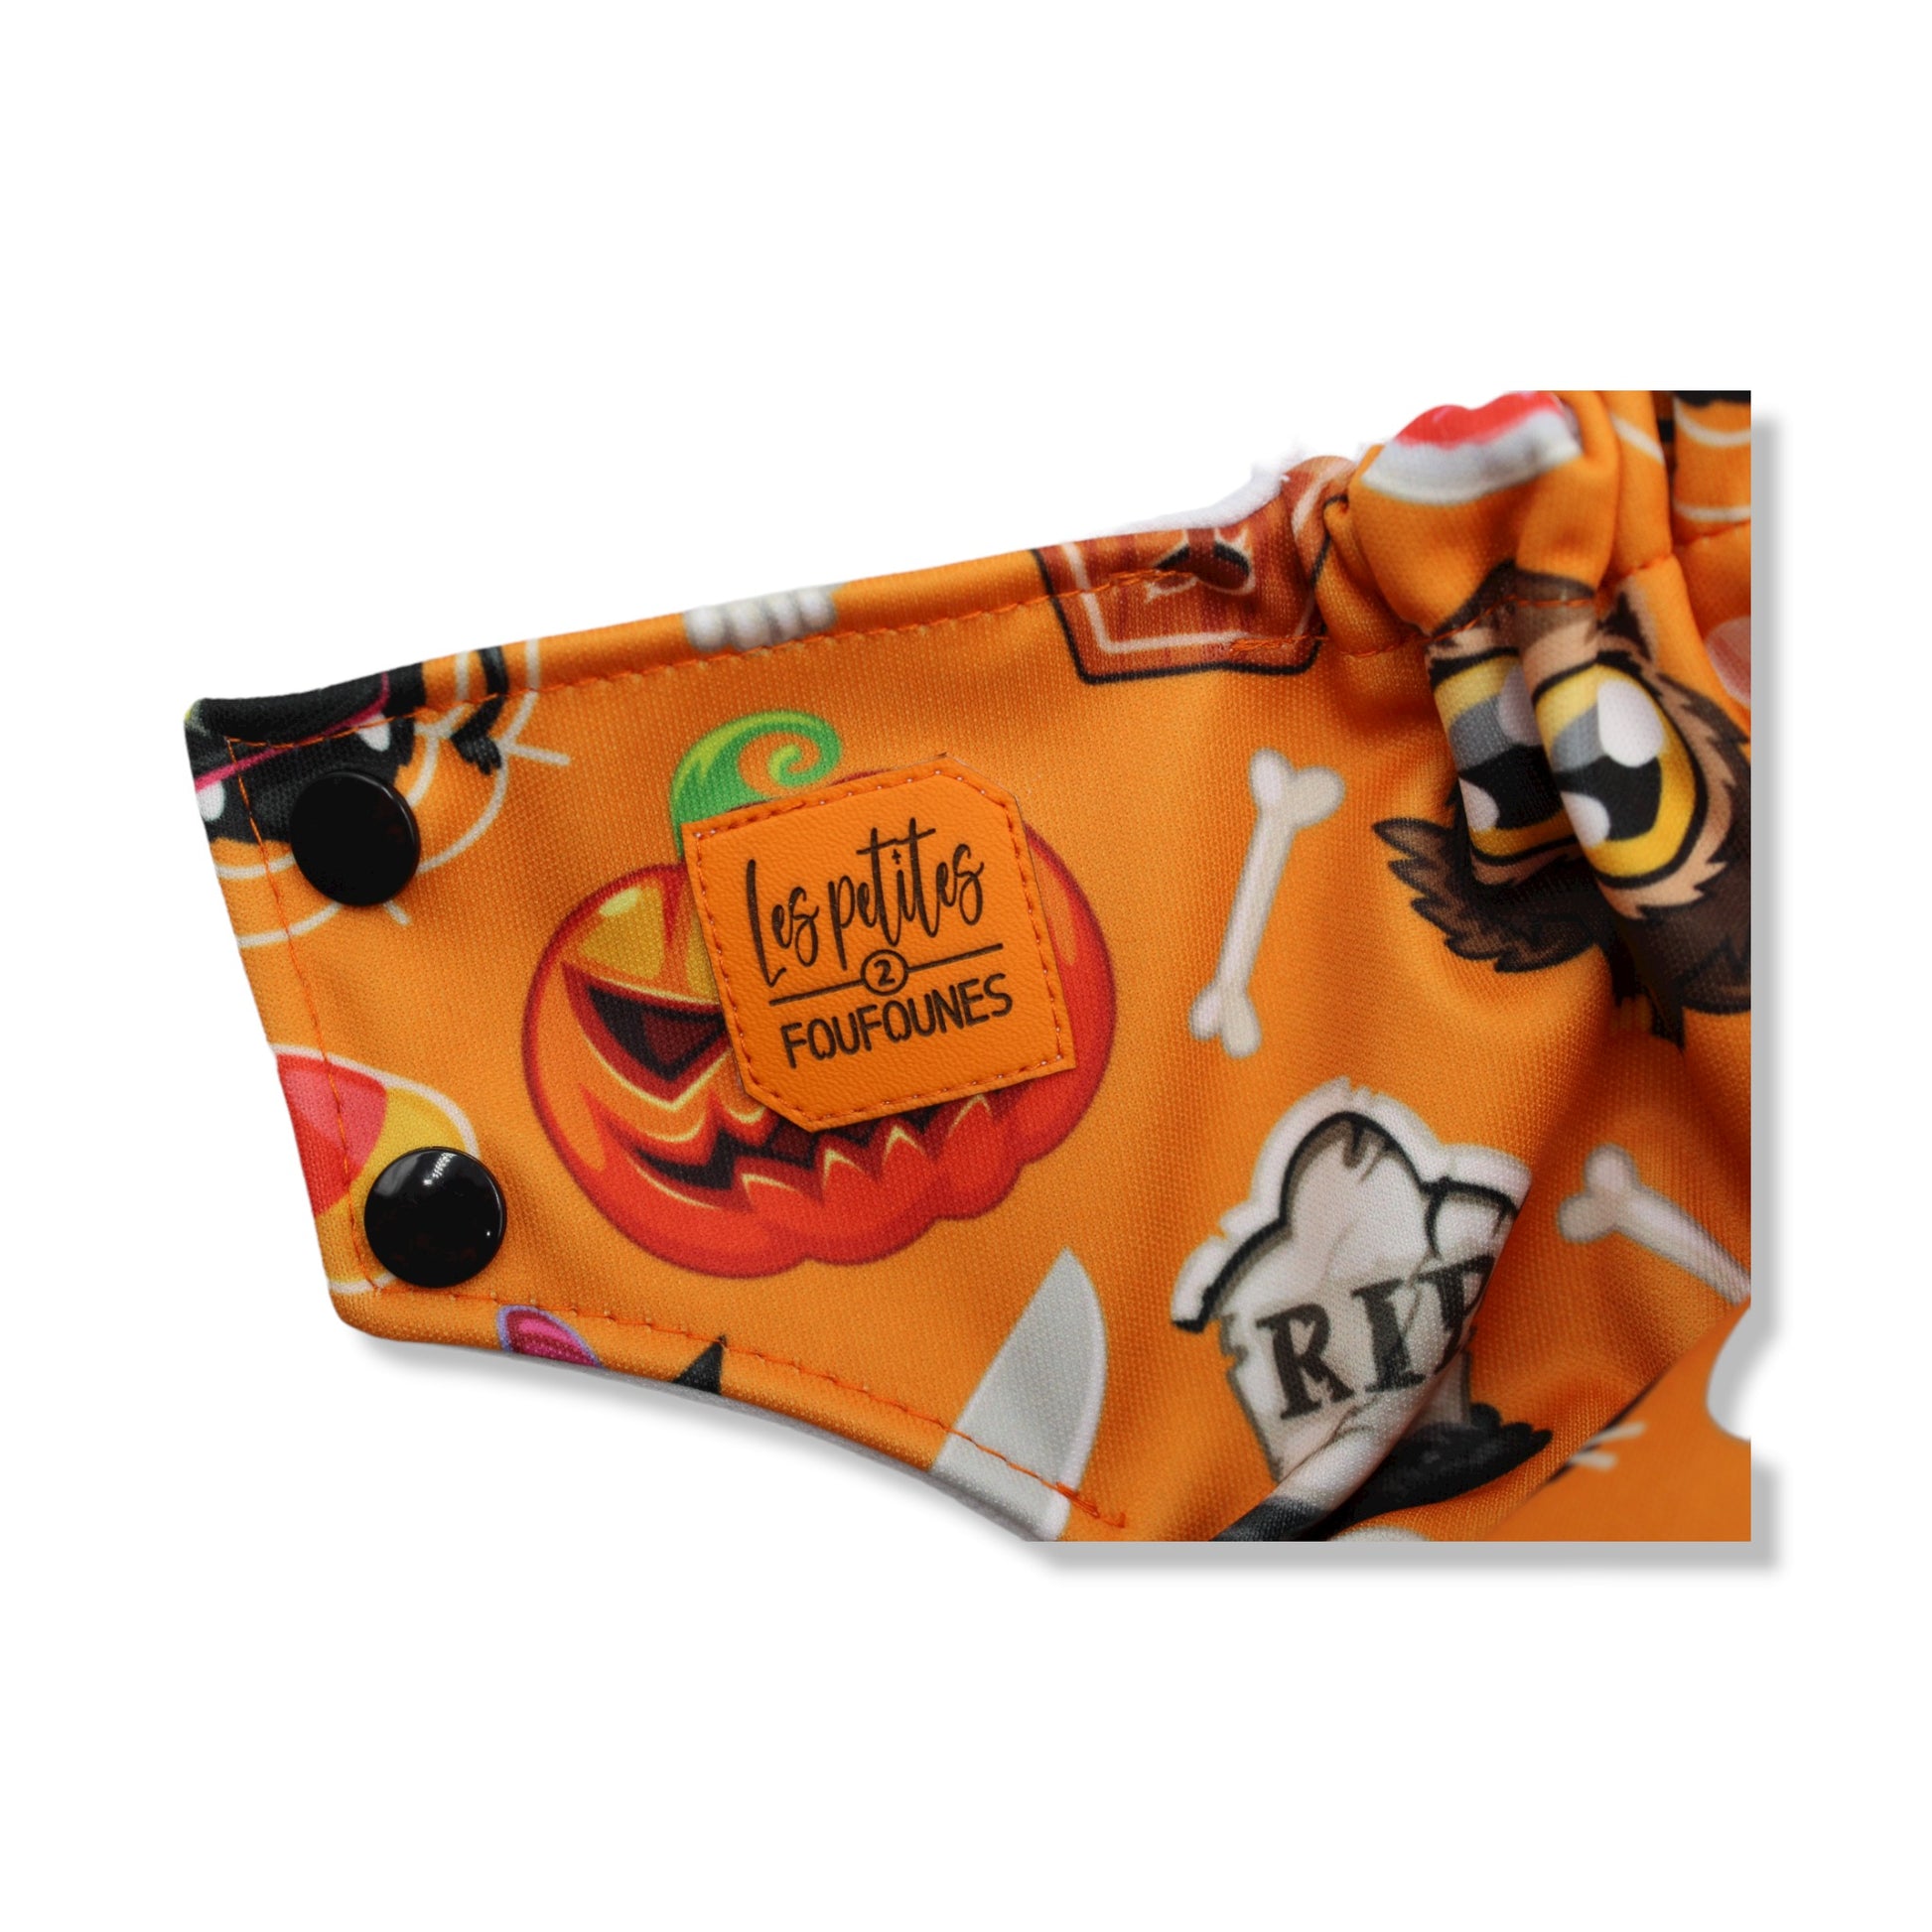 Couches - Halloween cuties (7250733334665)